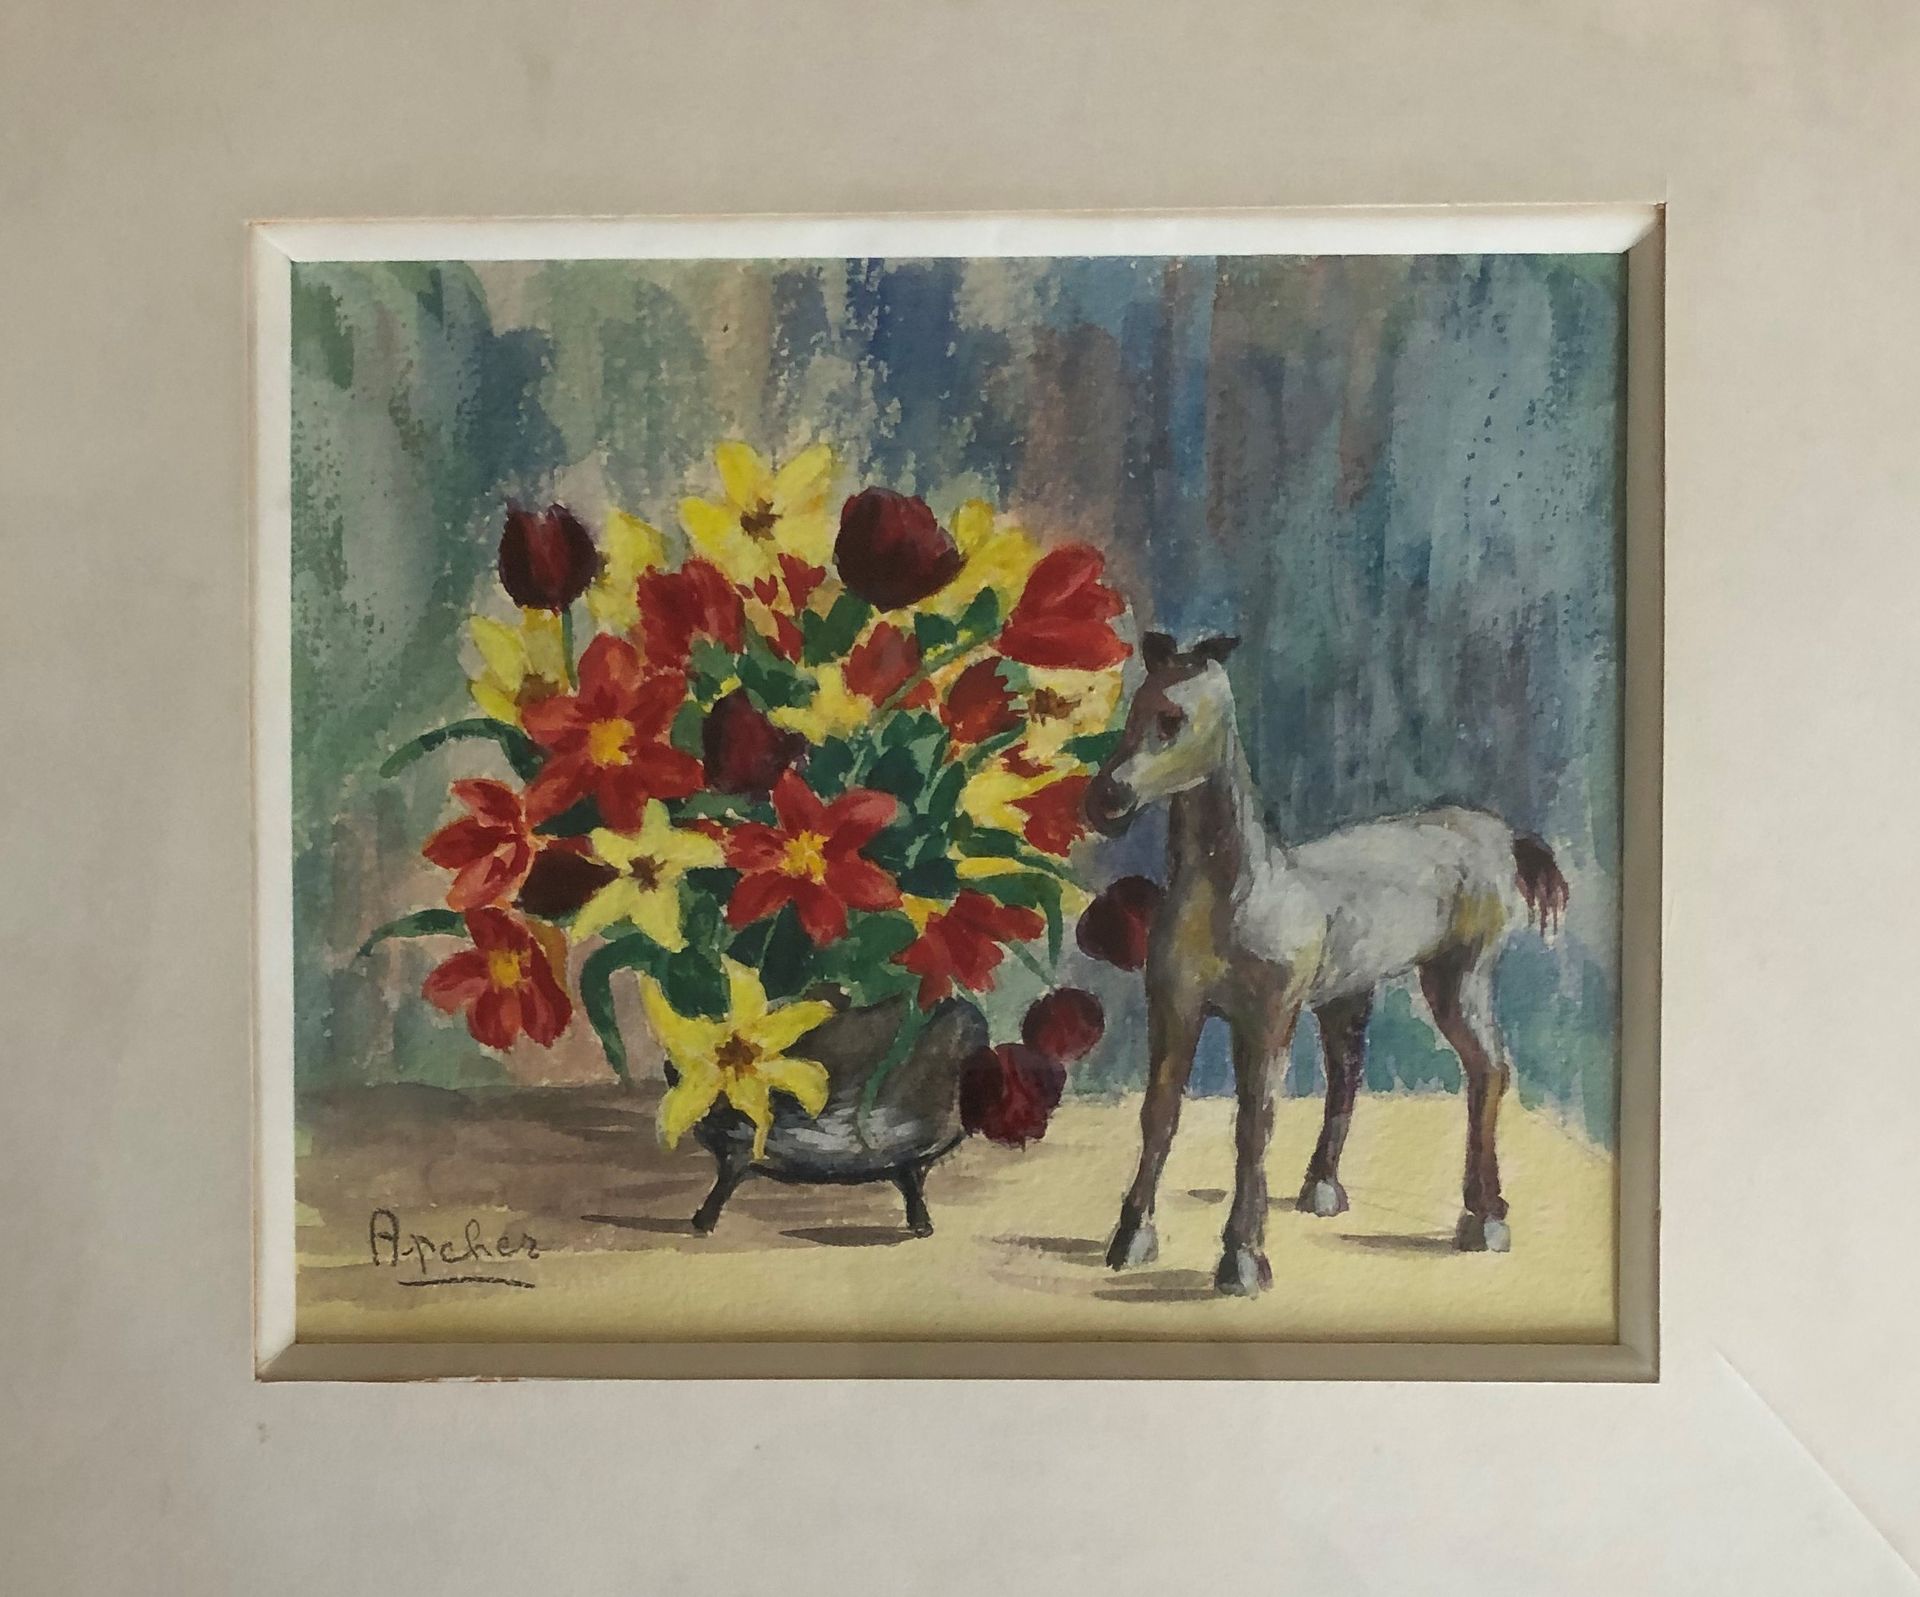 Null APCHER (20th century)

Lot including : 

- Still life with a horse and a bu&hellip;